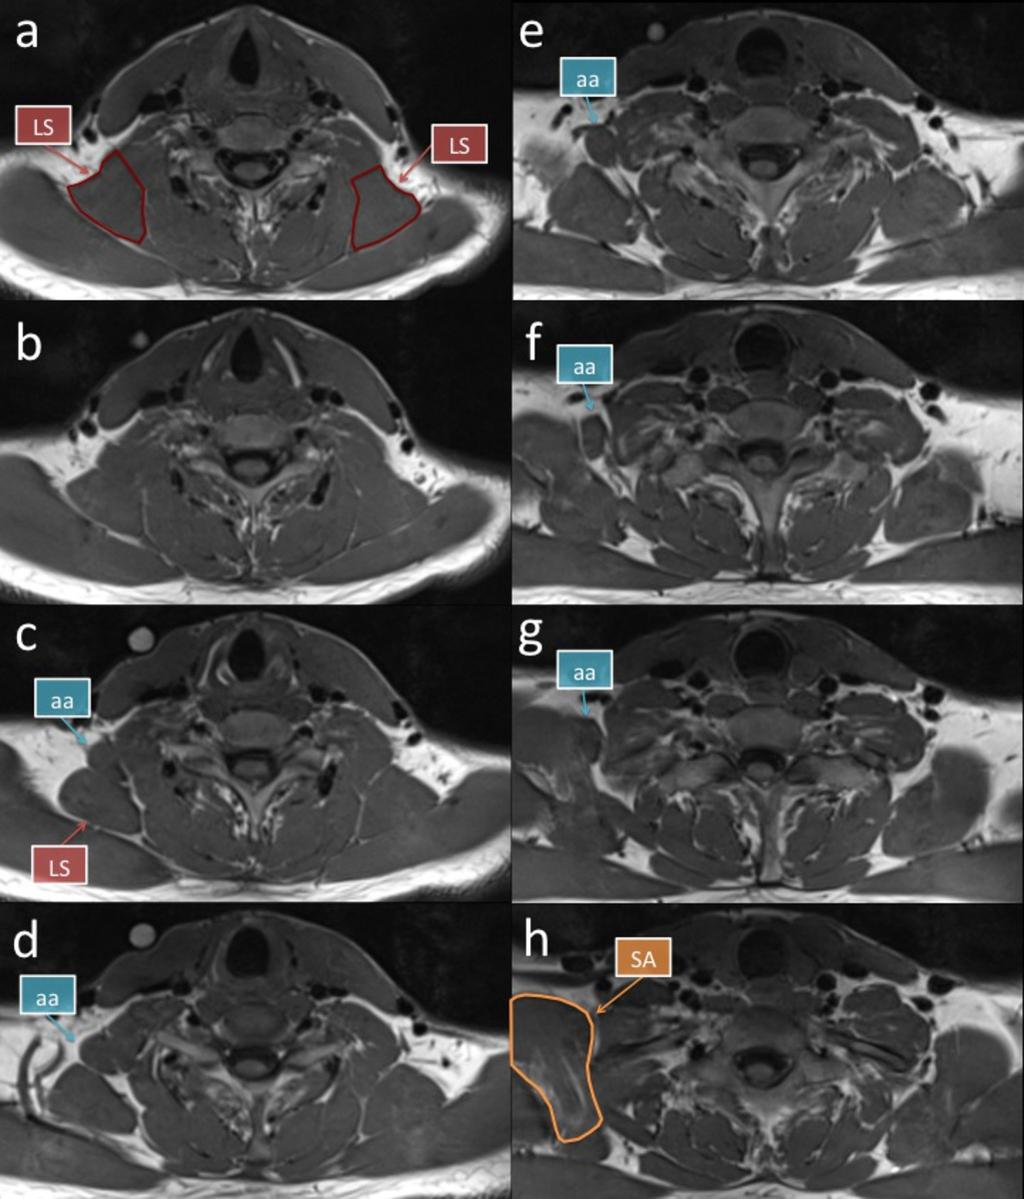 Fig. 2: MR images from superior (a) to inferior (h) obtained from a subject with a unilateral accessory attachment to